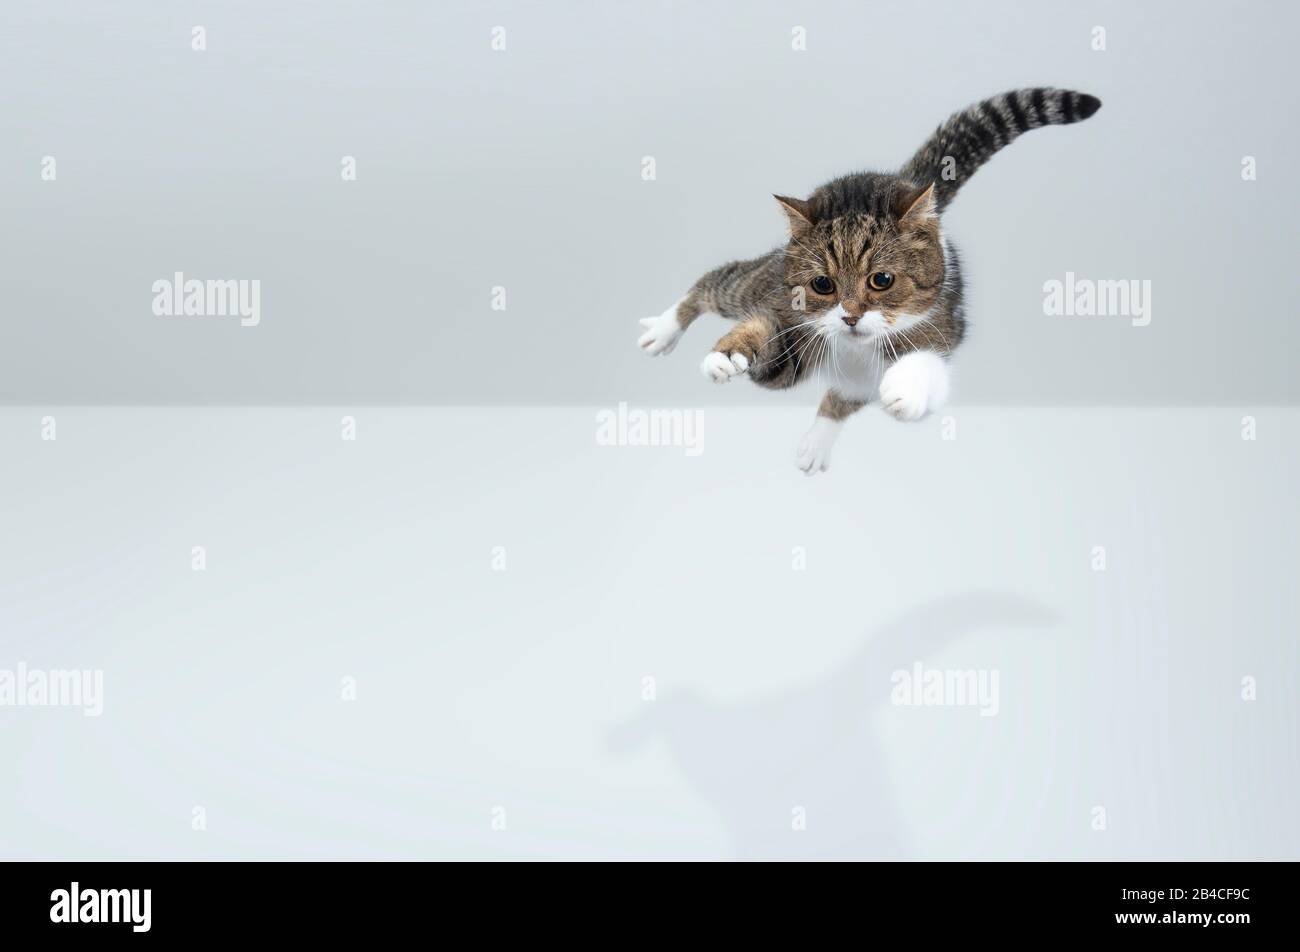 tabby white british shorthair cat jumping flying in front of white background with copy space Stock Photo